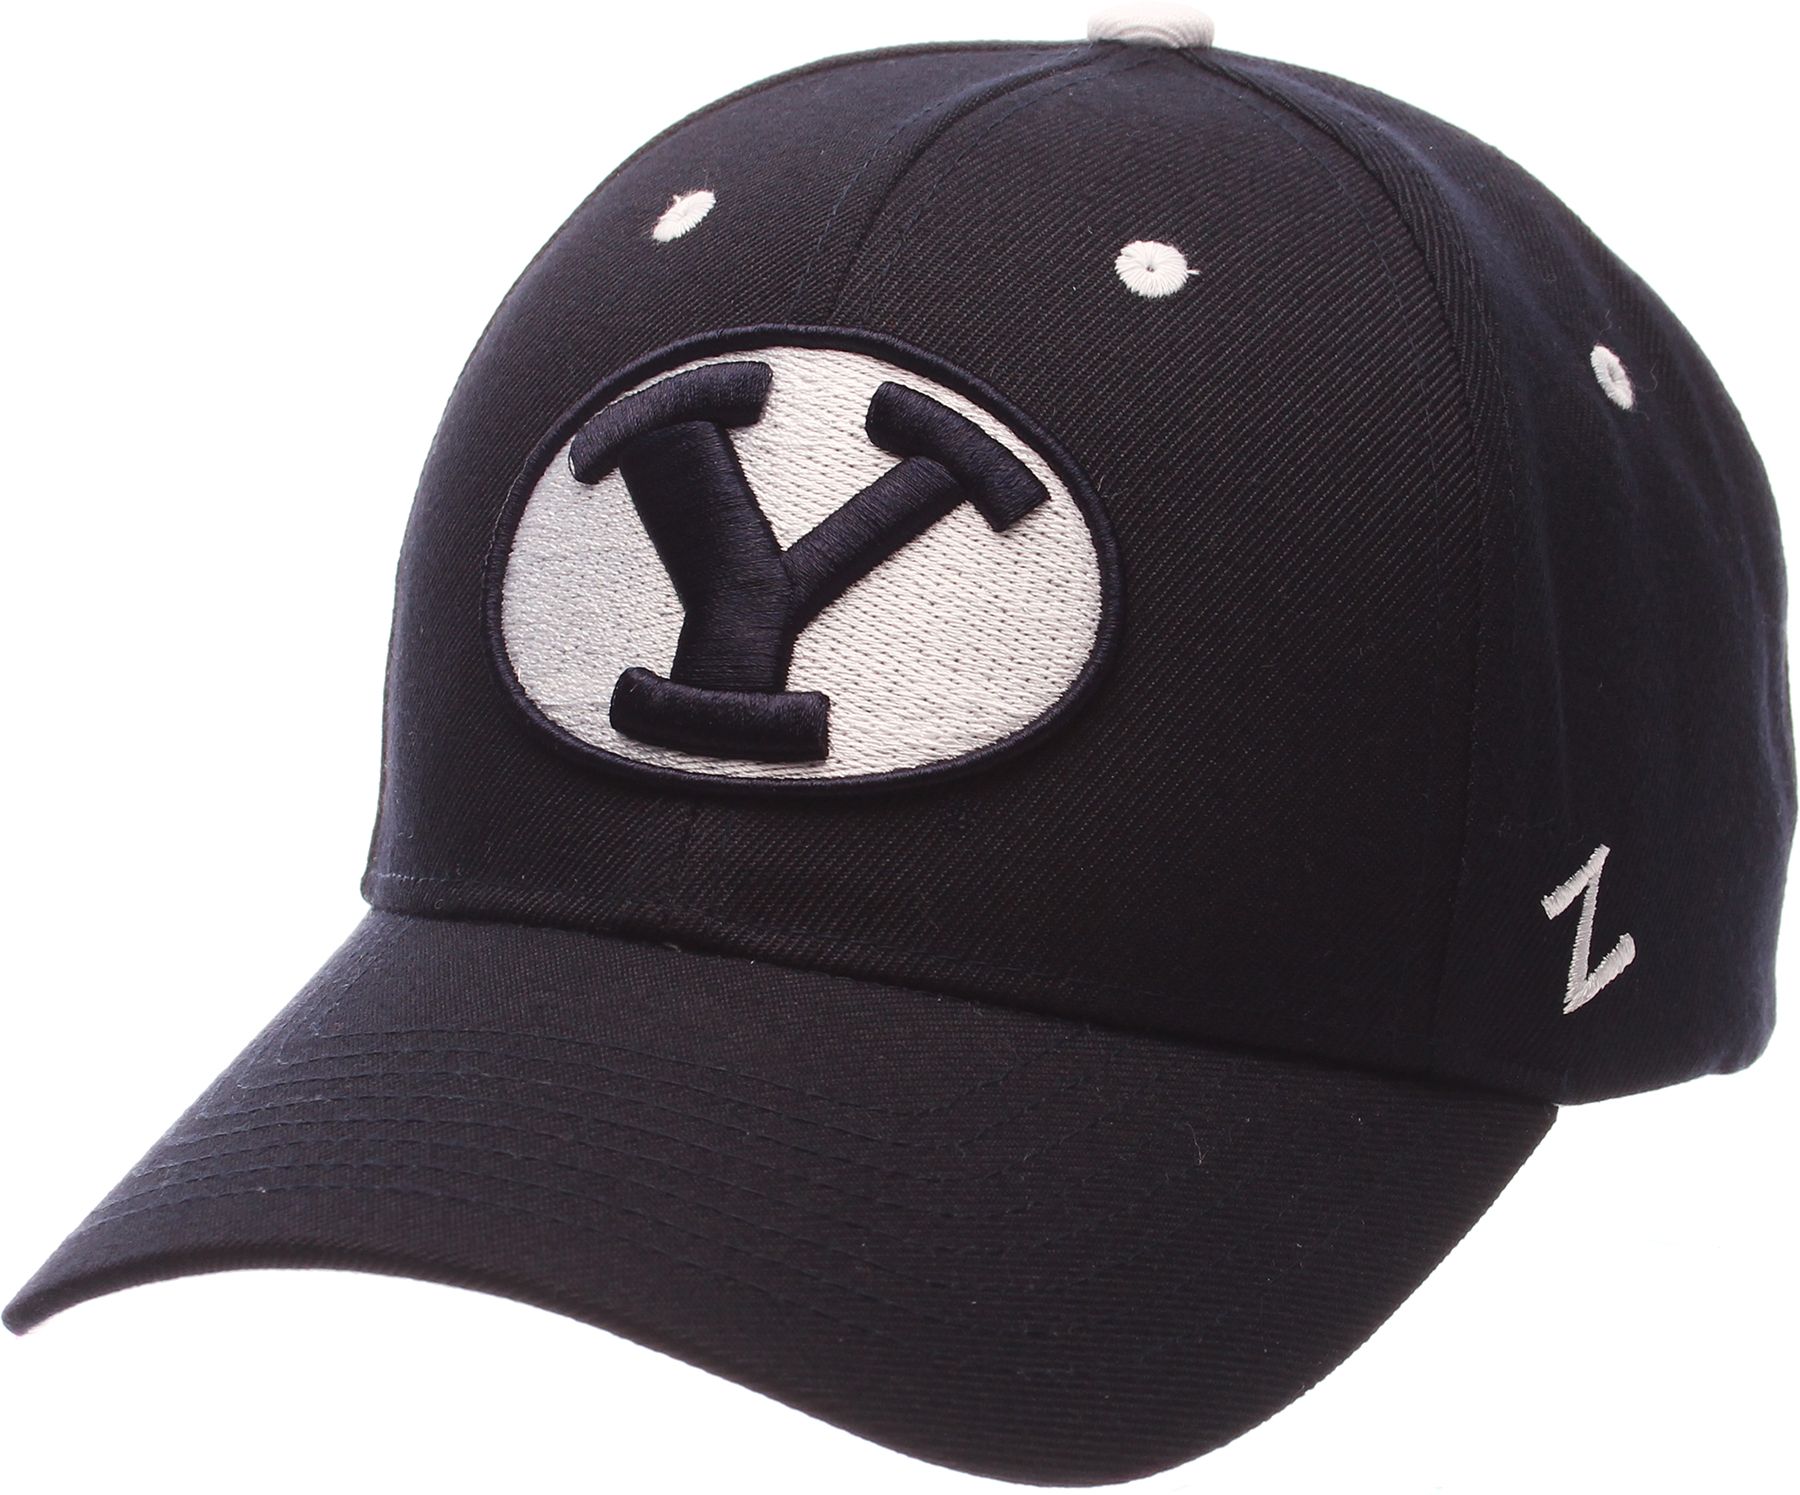 Byu Cougars Hats | Best Price Guarantee at DICK'S